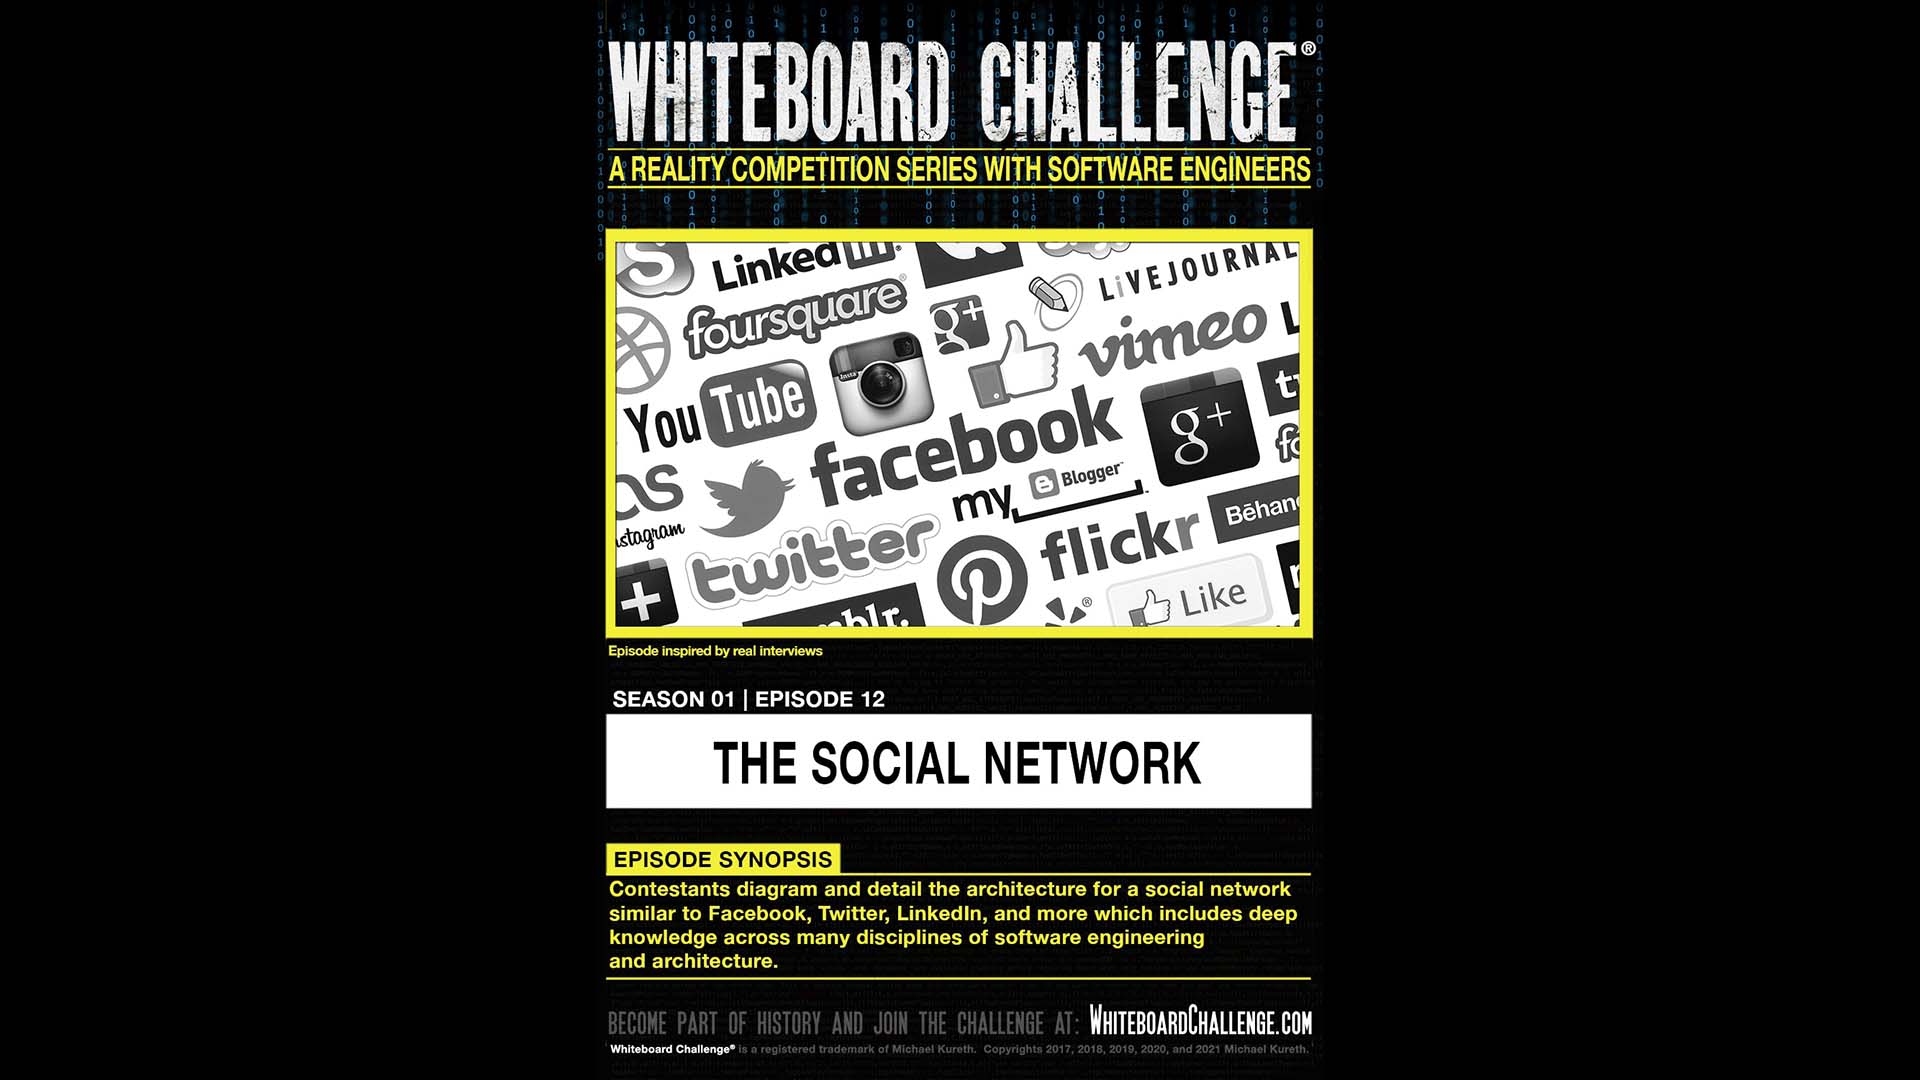 Whiteboard Challenge - The Social Network